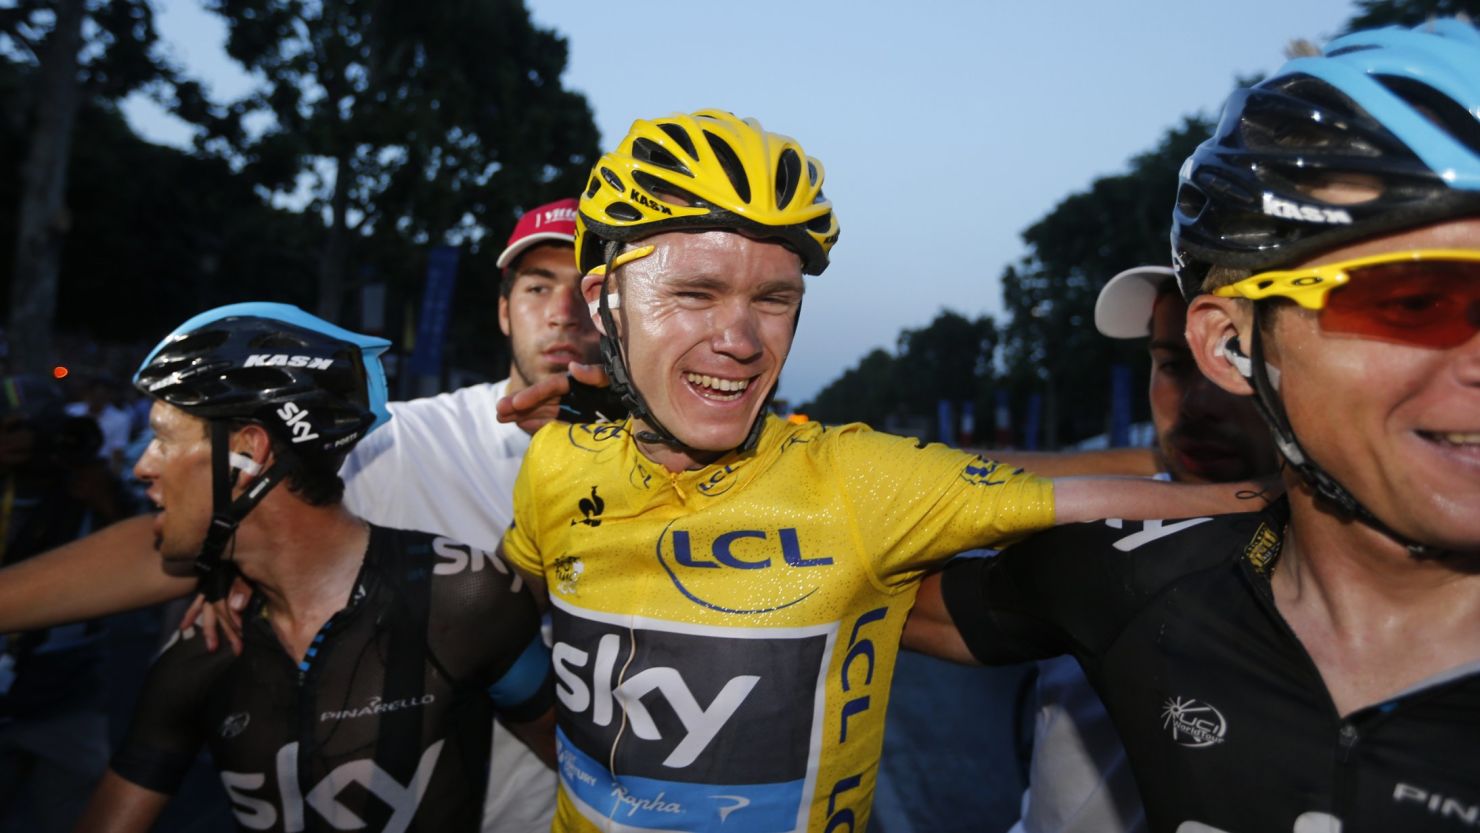 Chris Froome won the 100th edition of the Tour de France in dominant fashion after learning his trade in Kenya